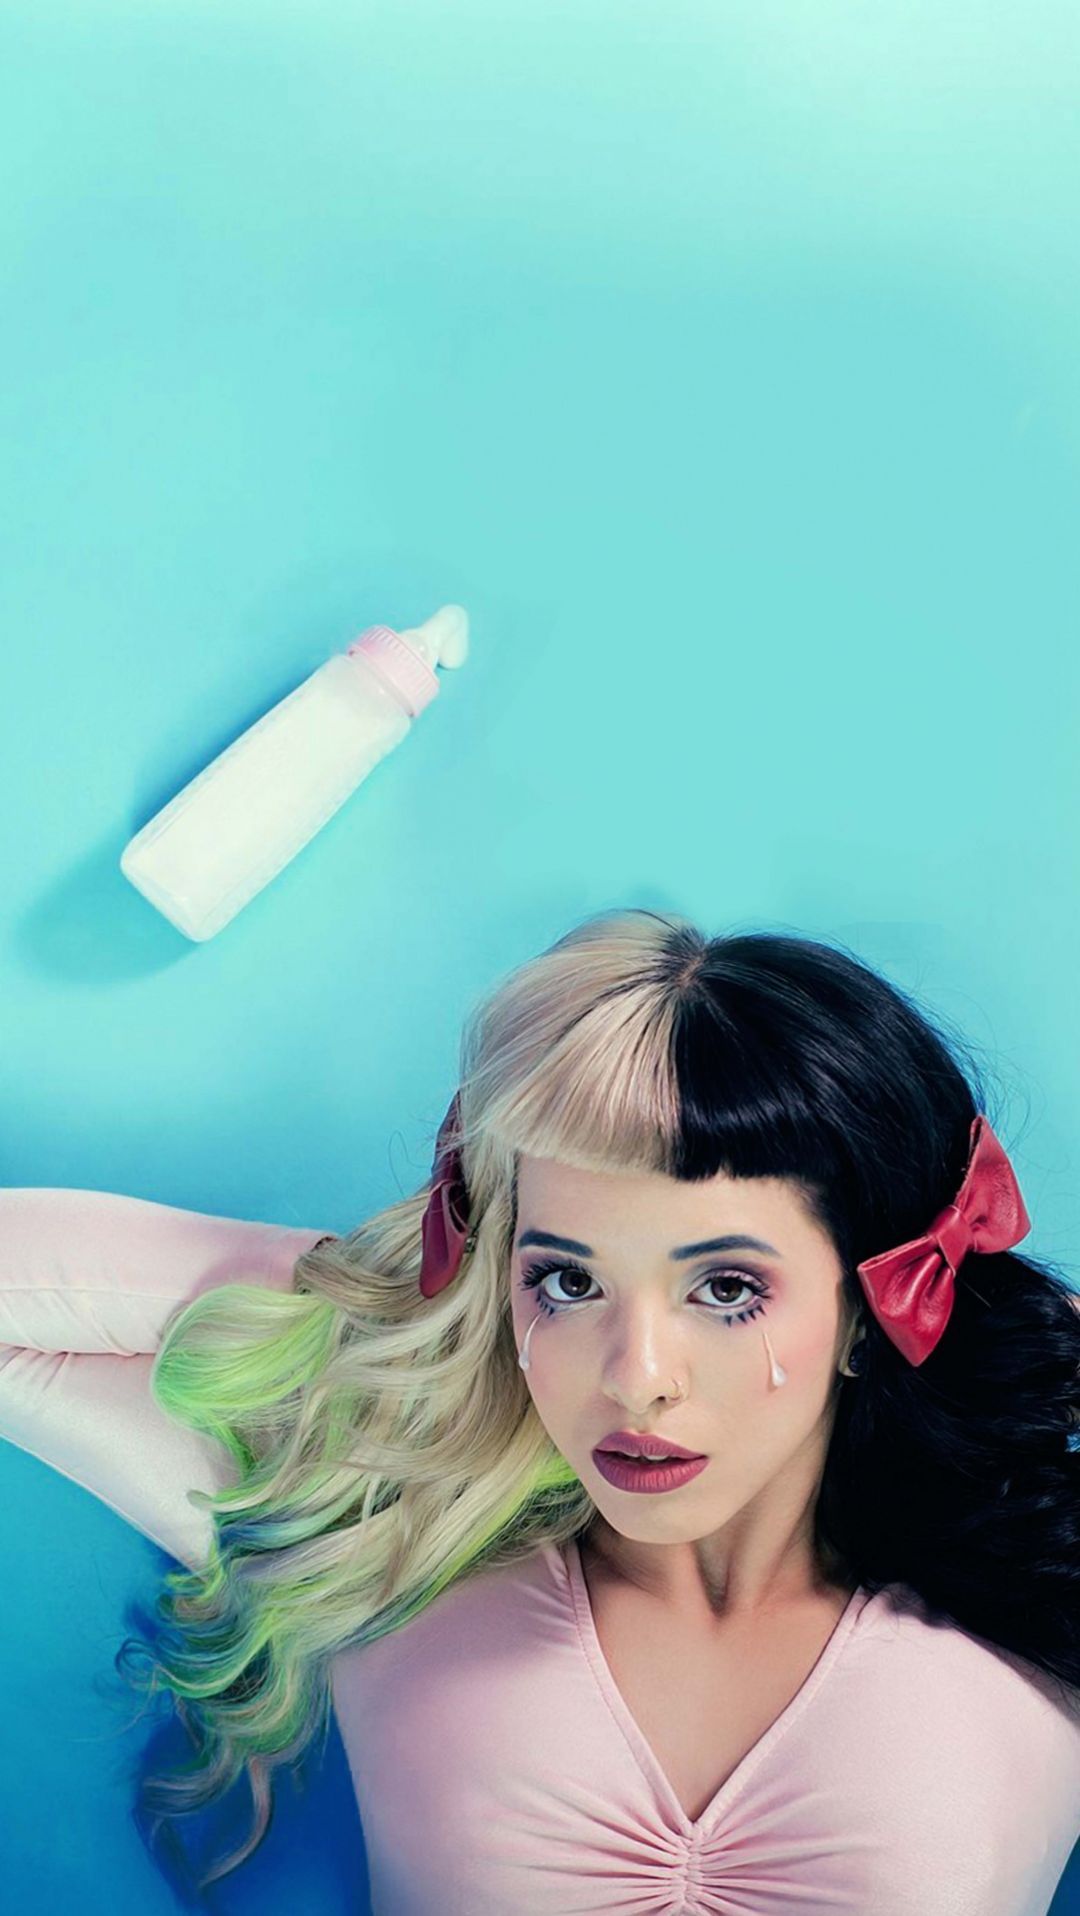 Wallpaper for iPhone of a woman with a bow tie and a baby bottle - Melanie Martinez